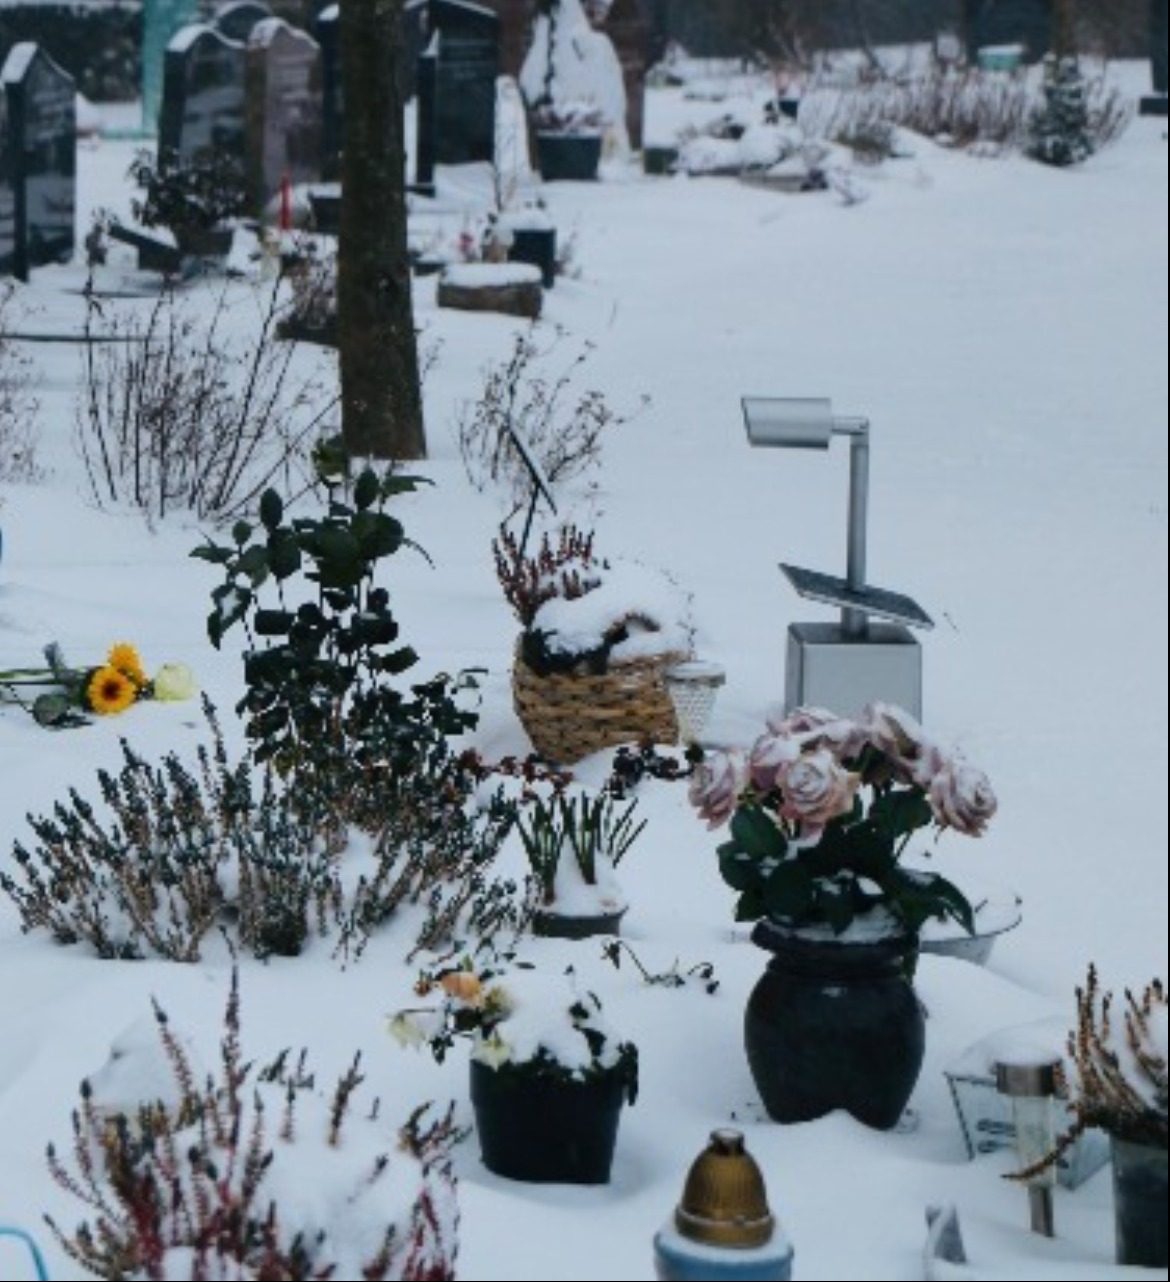 How to Care for a Loved Ones' Resting Place in the Winter